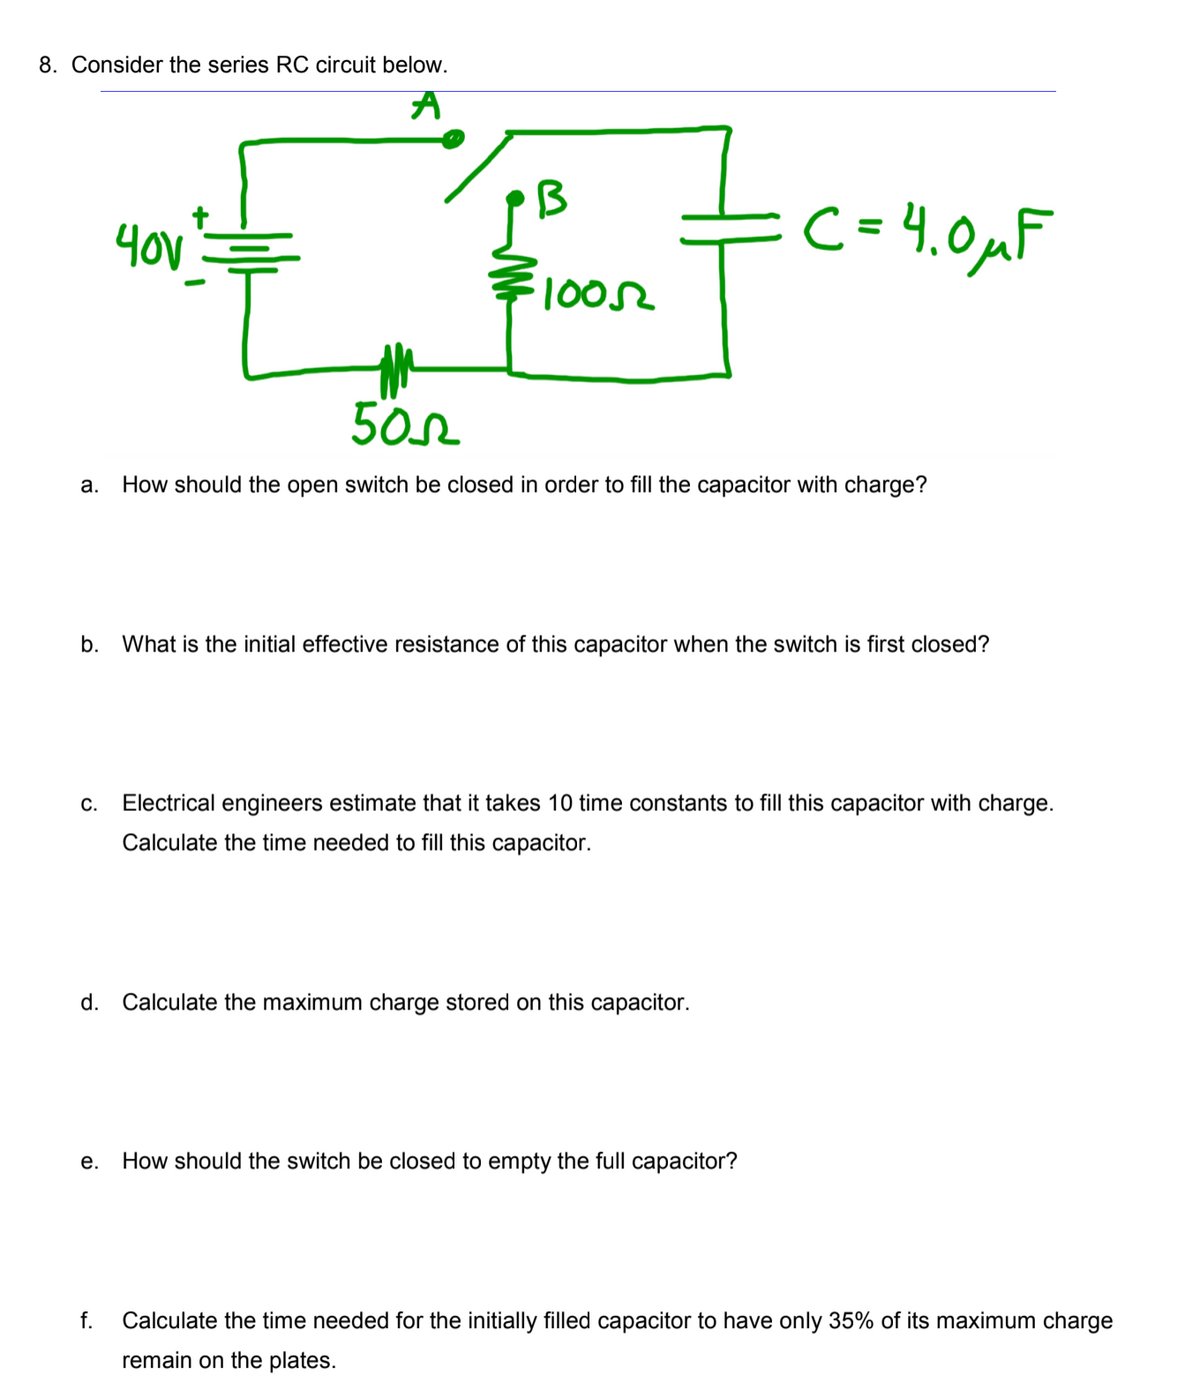 8. Consider the series ROC circuit below.
=c= 4.0uF
1002
a. How should the open switch be closed in order to fill the capacitor with charge?
b.
What is the initial effective resistance of this capacitor when the switch is first closed?
С.
Electrical engineers estimate that it takes 10 time constants to fill this capacitor with charge.
Calculate the time needed to fill this capacitor.
d.
Calculate the maximum charge stored on this capacitor.
е.
How should the switch be closed to empty the full capacitor?
f.
Calculate the time needed for the initially filled capacitor to have only 35% of its maximum charge
remain on the plates.
